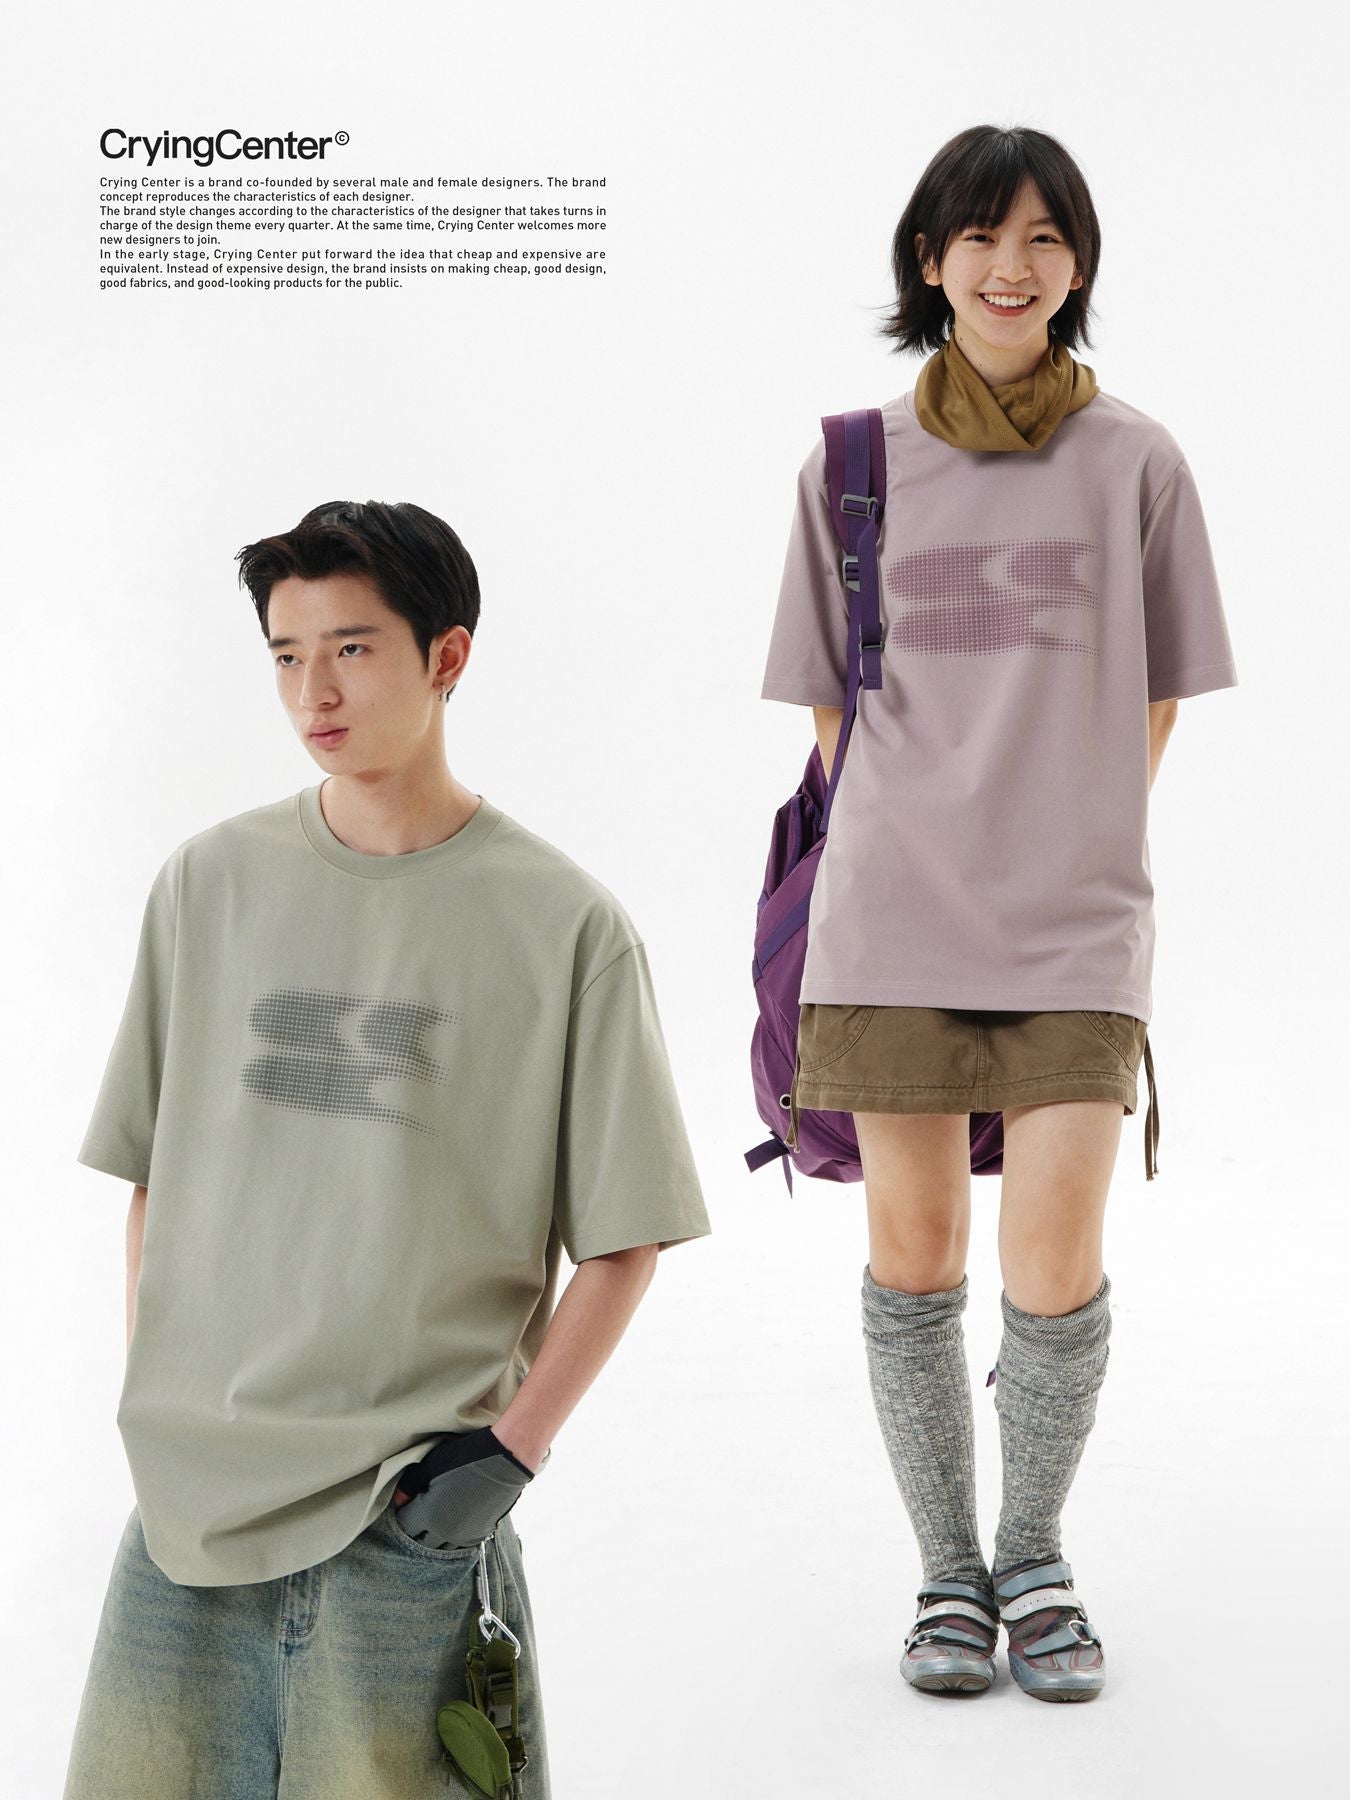 Gaussian Blurred Logo T-Shirt Korean Street Fashion T-Shirt By Crying Center Shop Online at OH Vault